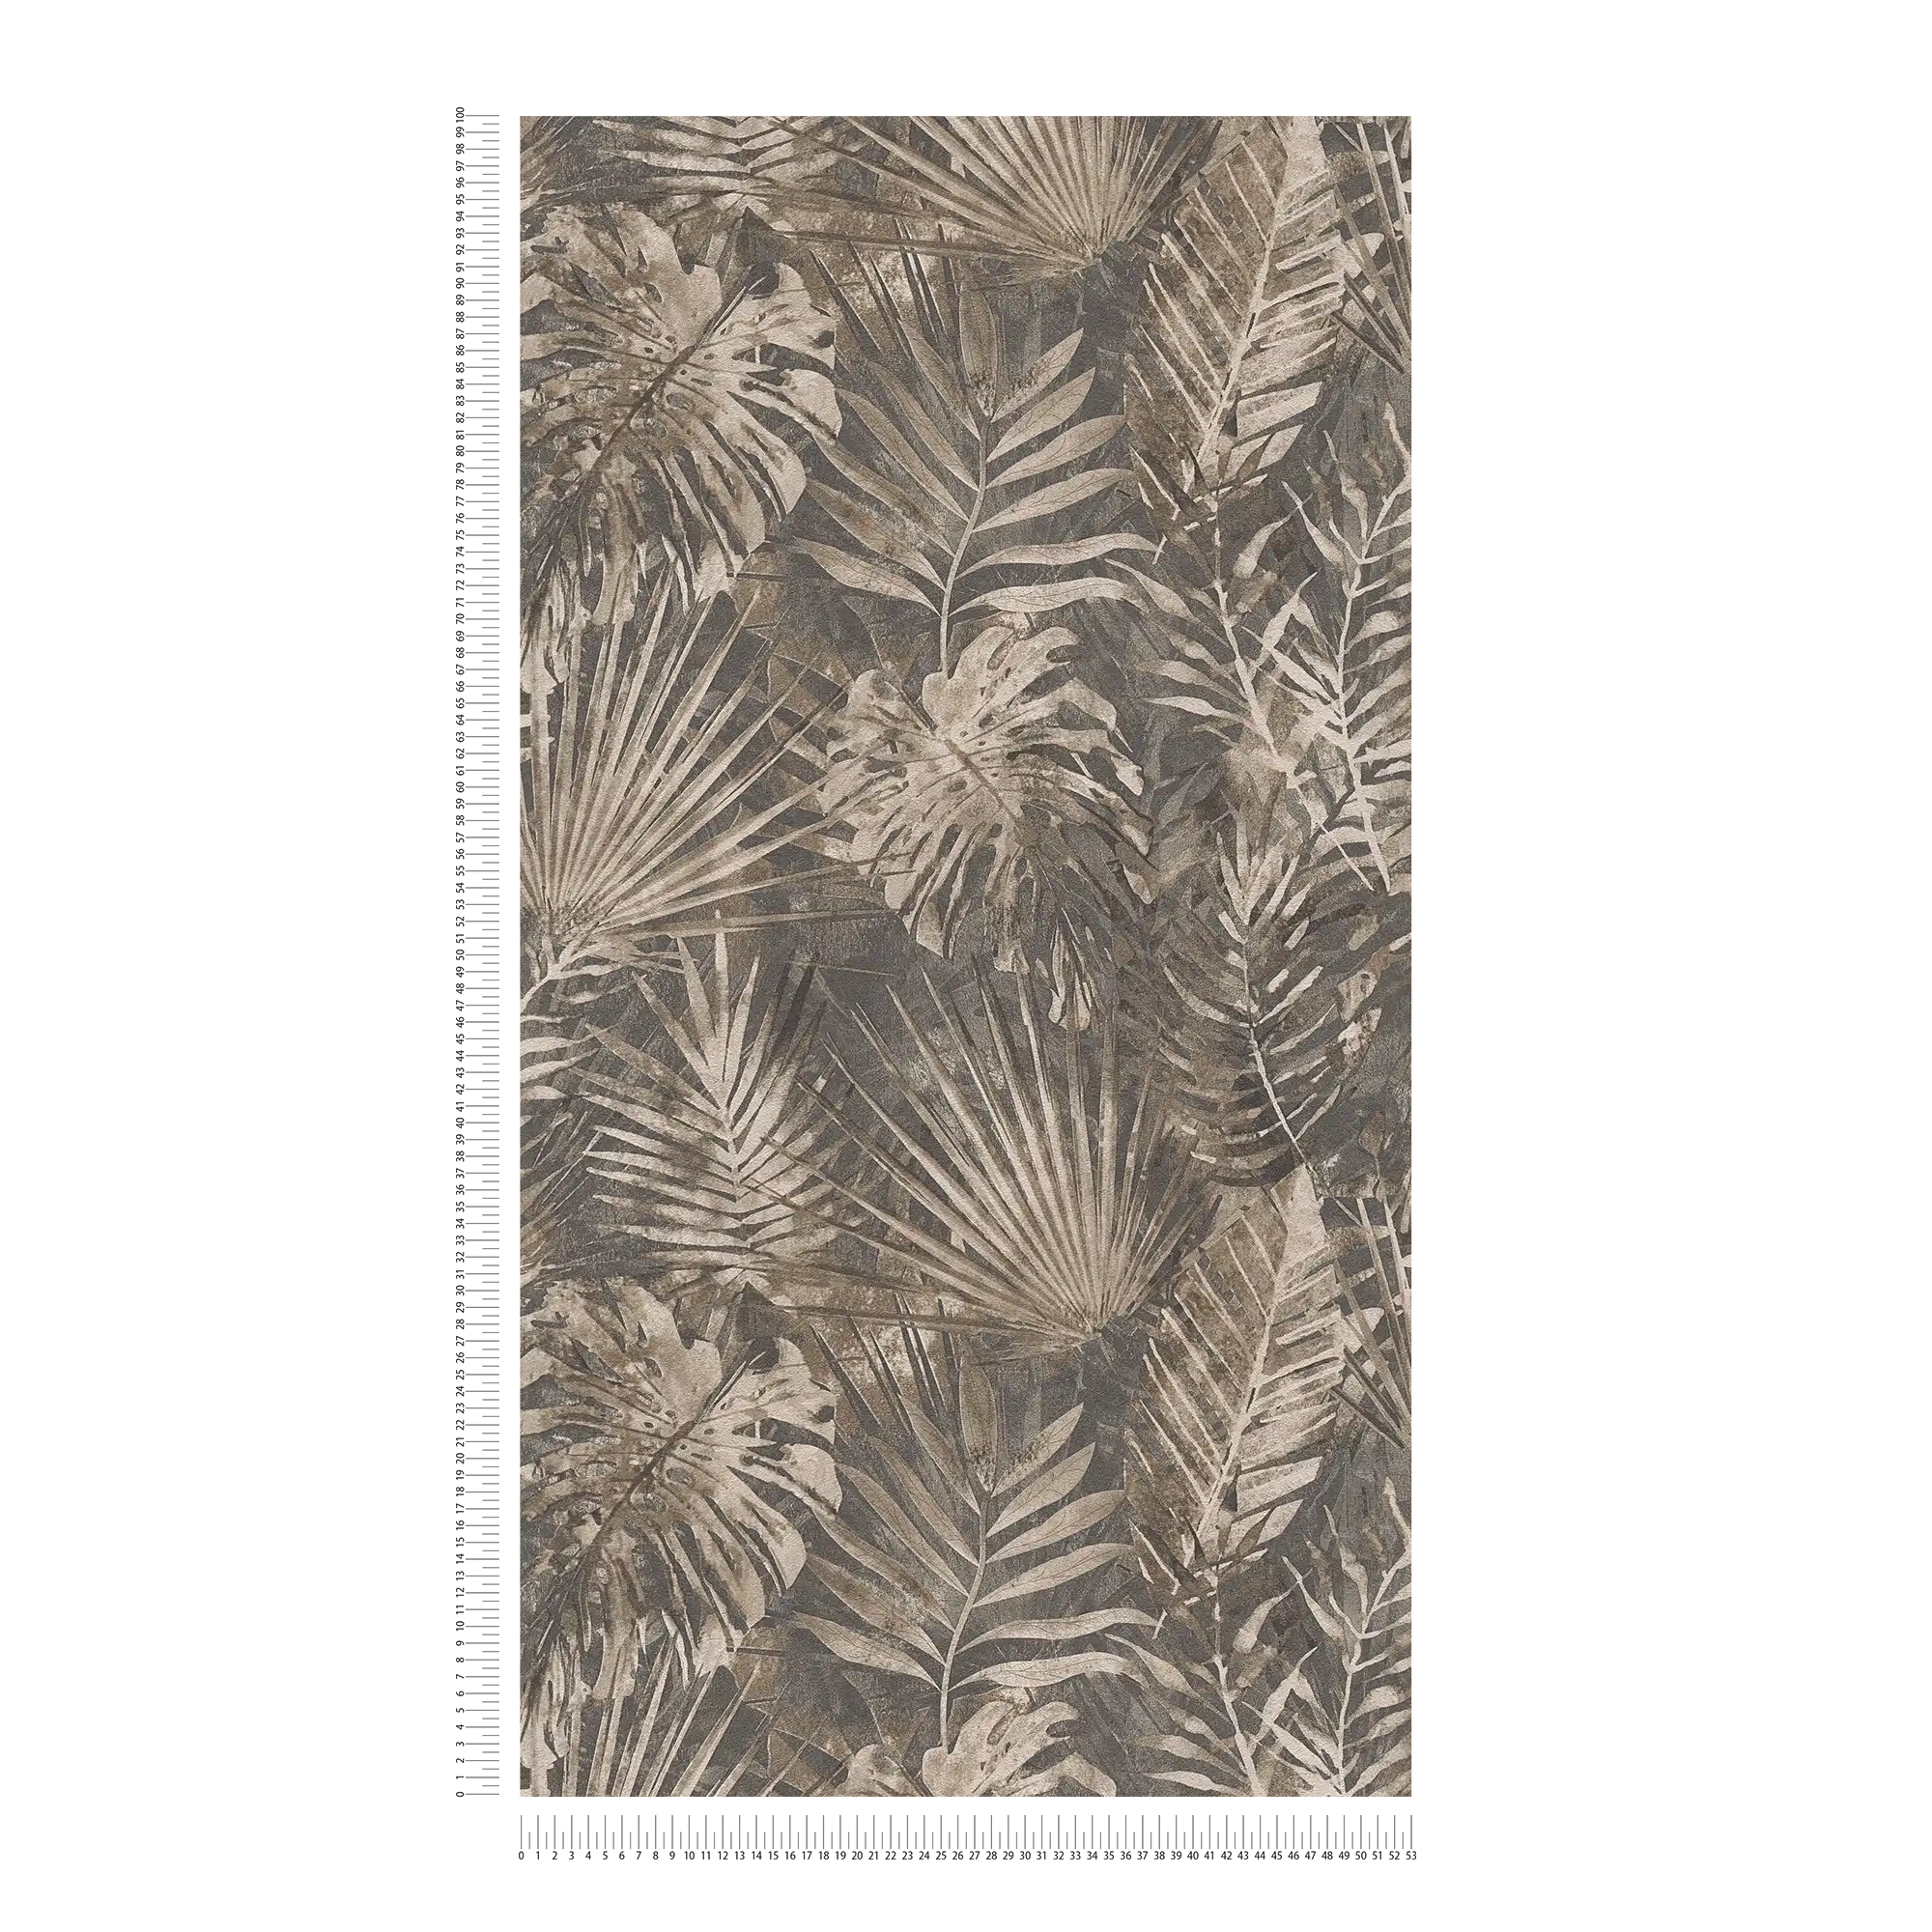             Jungle wallpaper with tropical leaf pattern PVC-free - brown, beige, anthracite
        